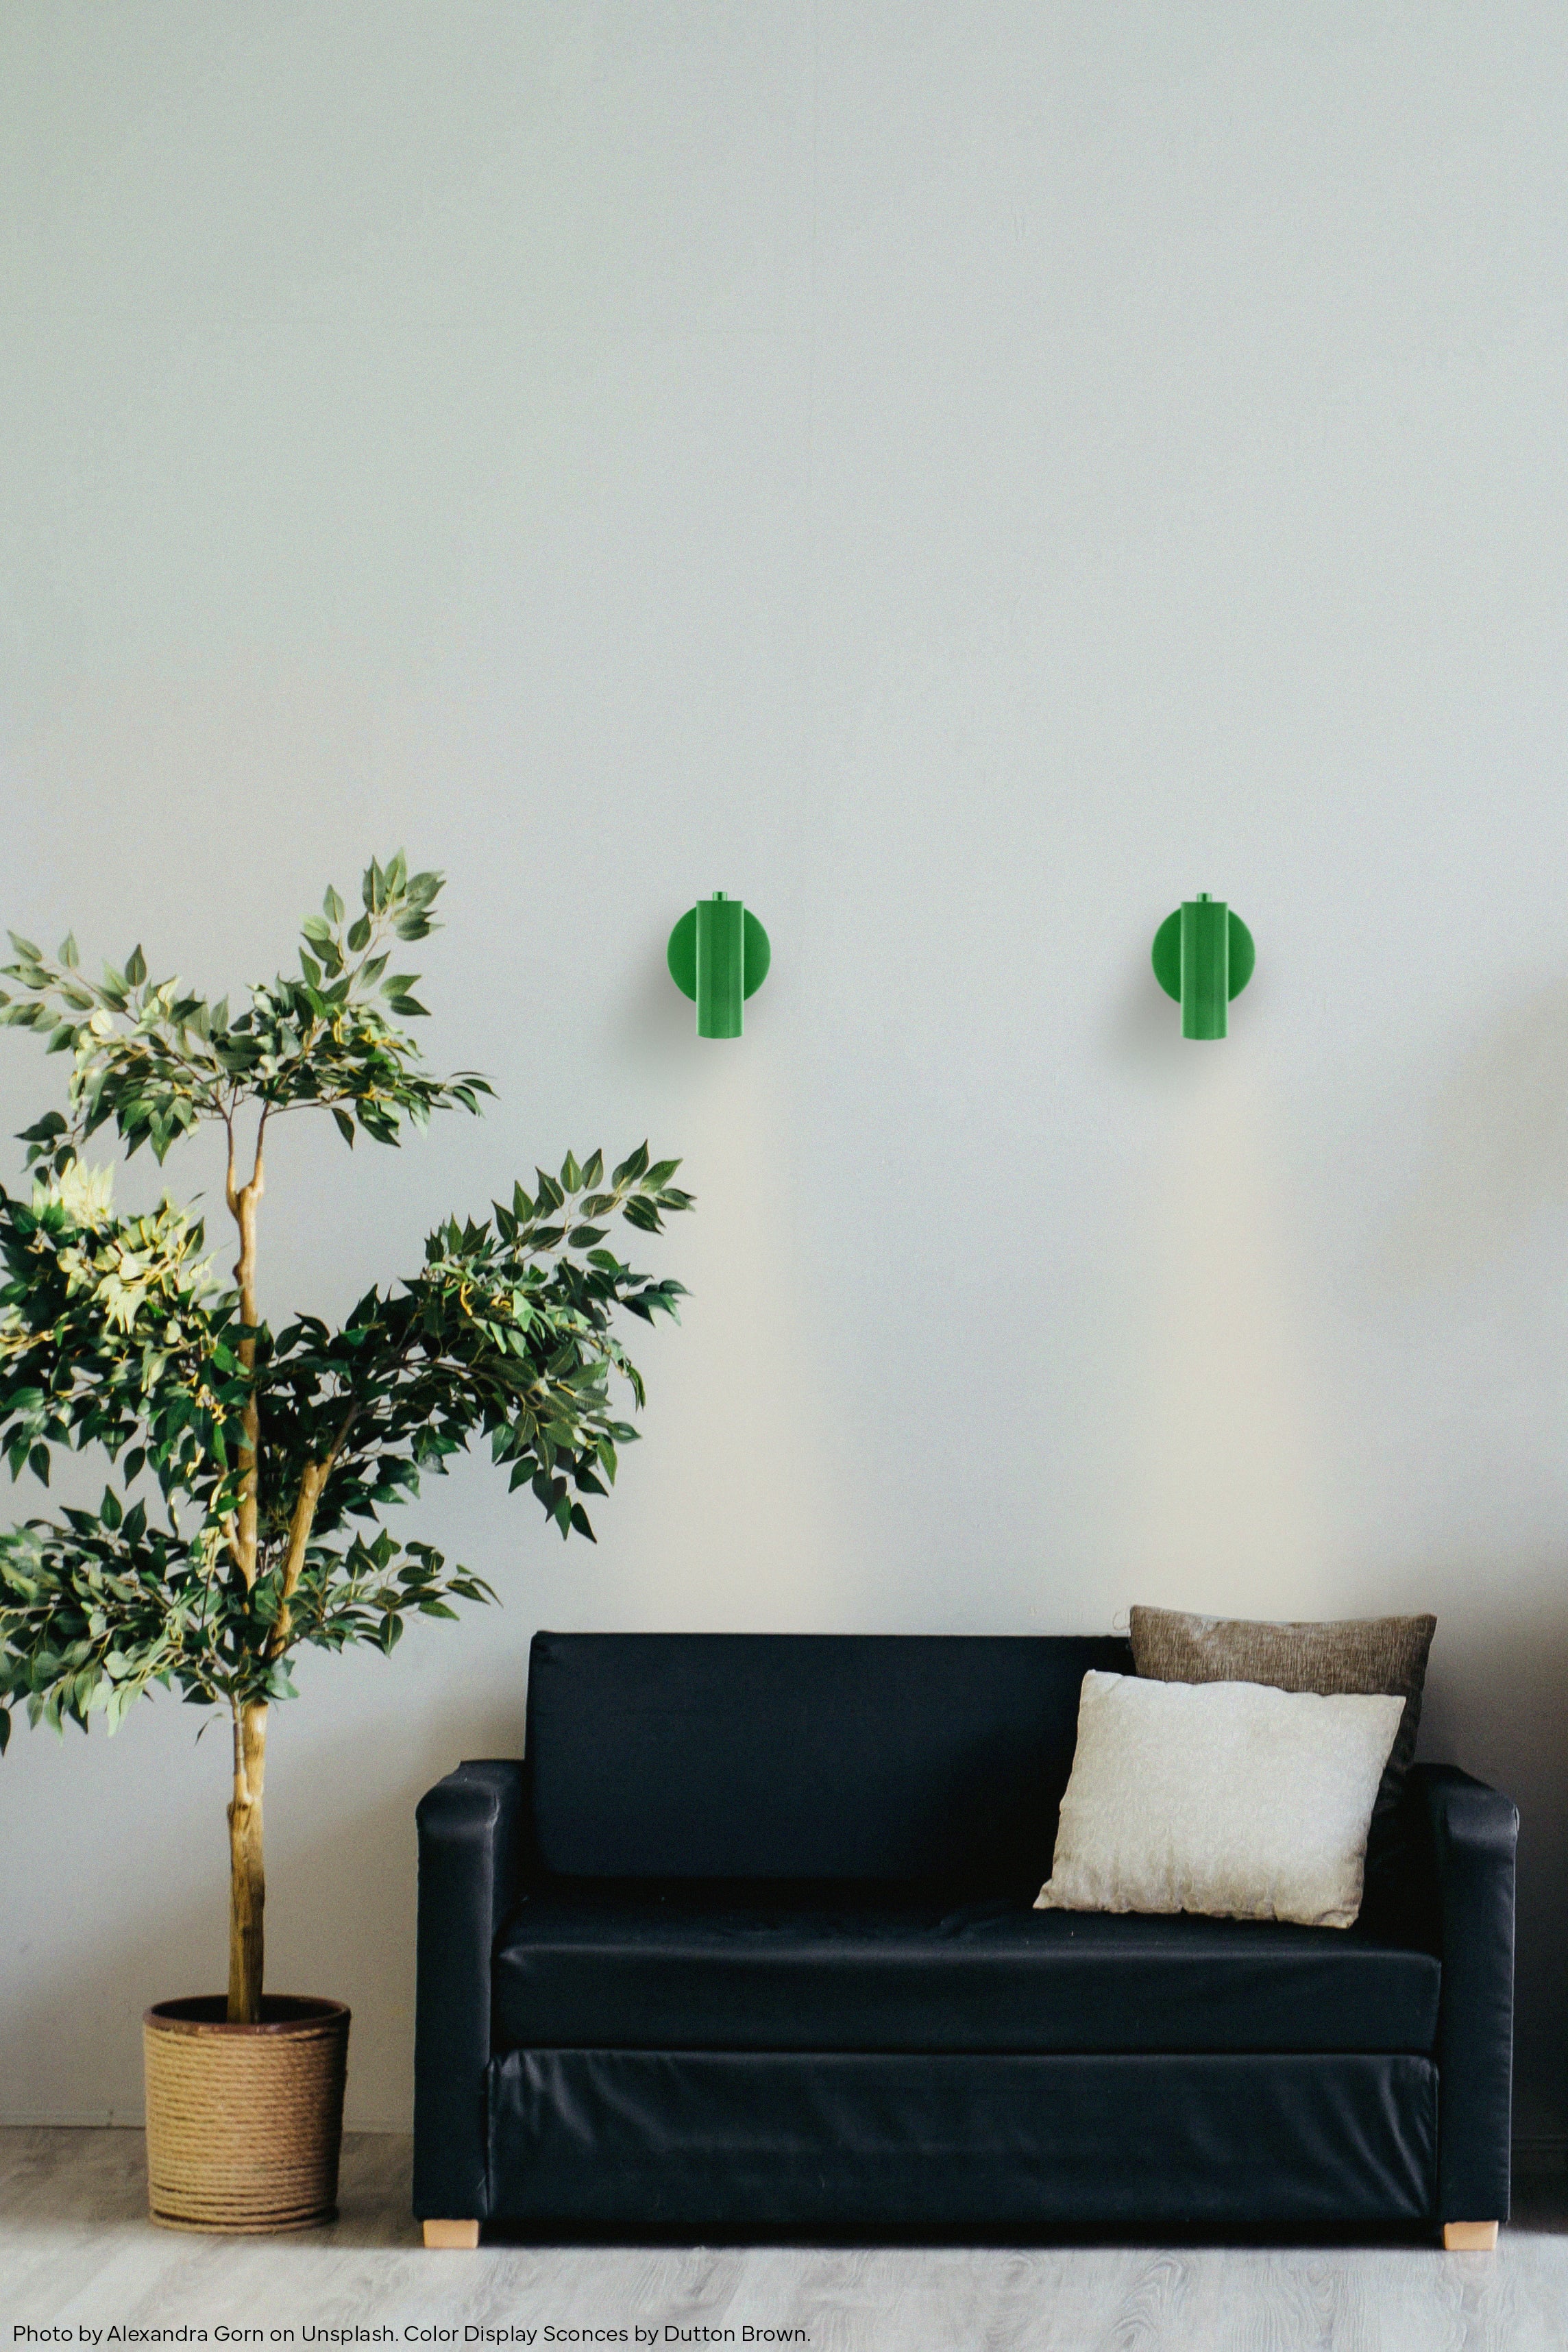 Python green color Display sconce by Dutton Brown. Photo by Alexandra Gorn on Unsplash. _hover